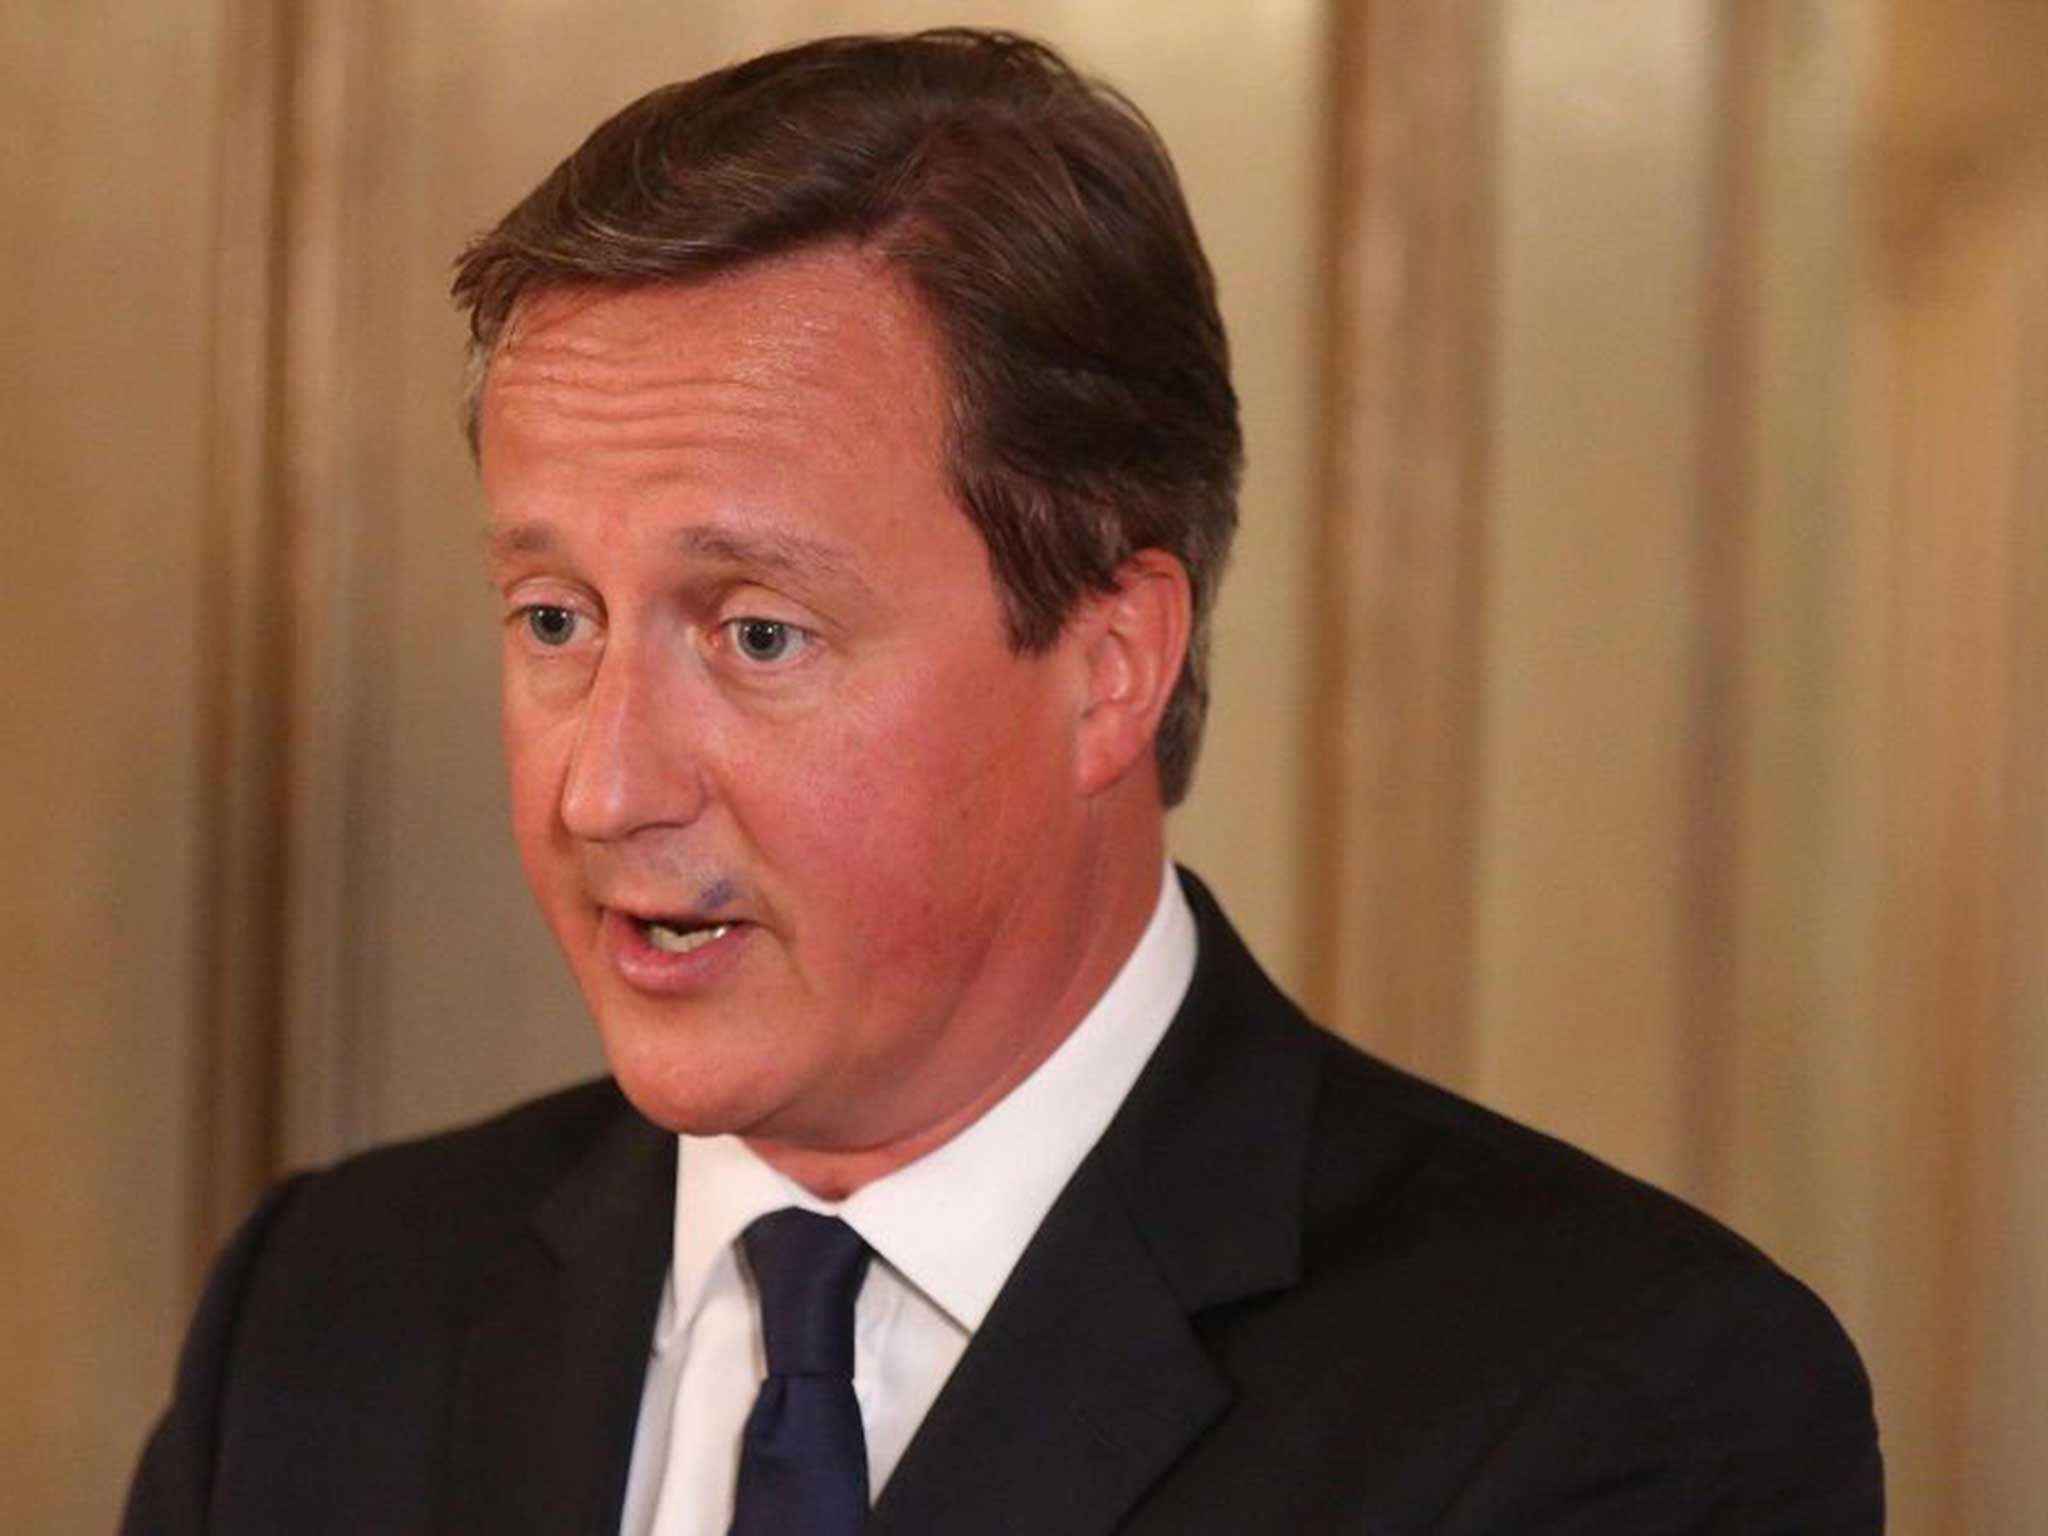 David Cameron had an unfortunate encounter with some ink during a press conference